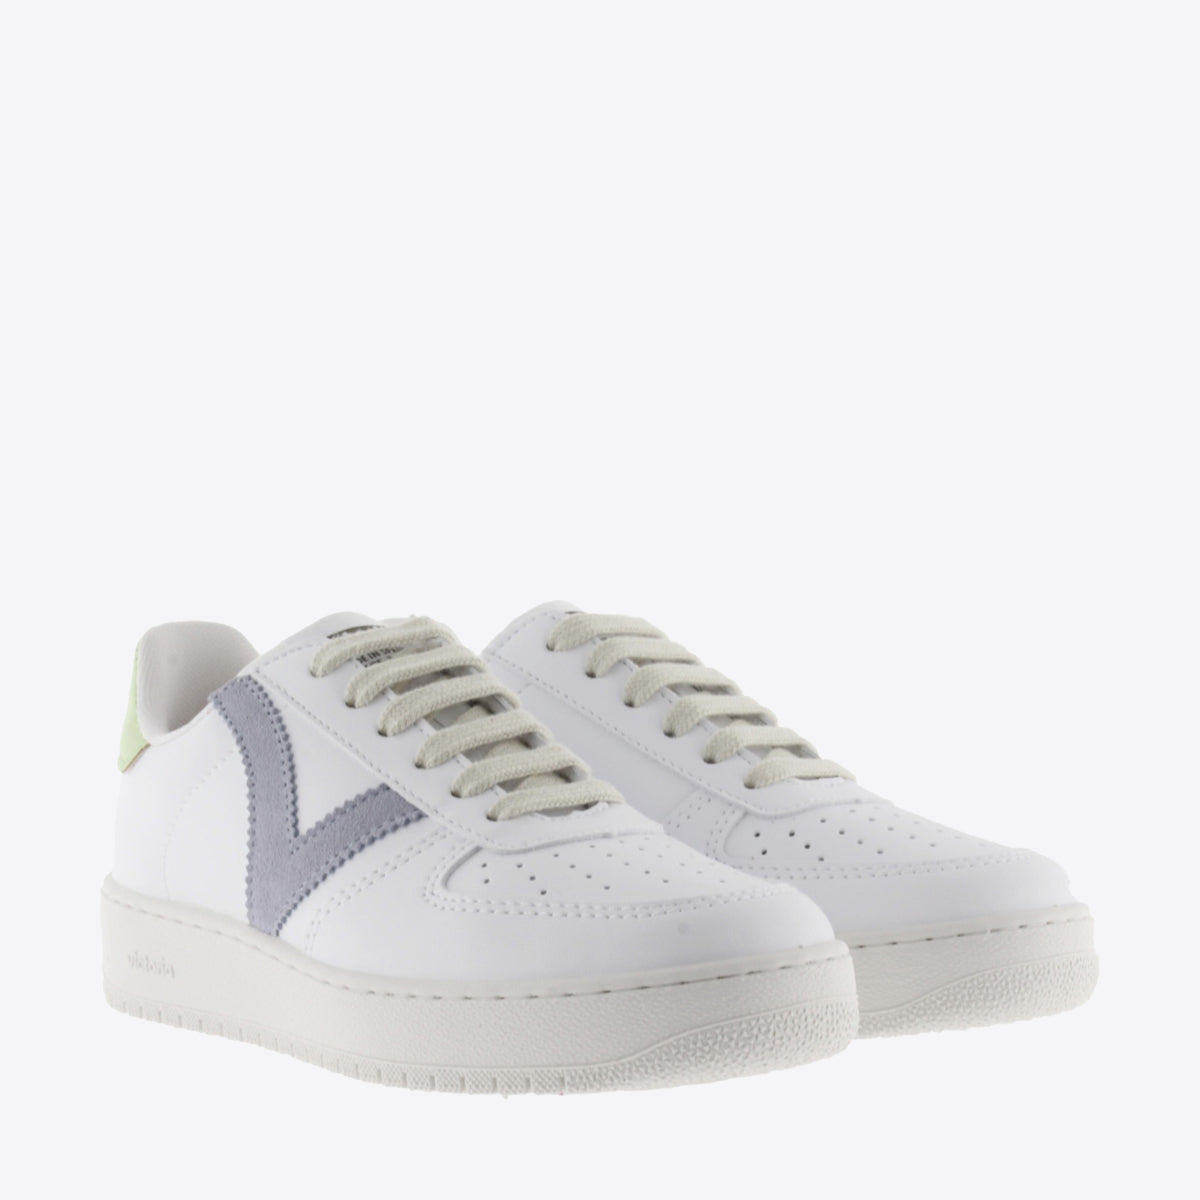 VICTORIA Madrid Contrast Faux Leather Lilac - Image 5